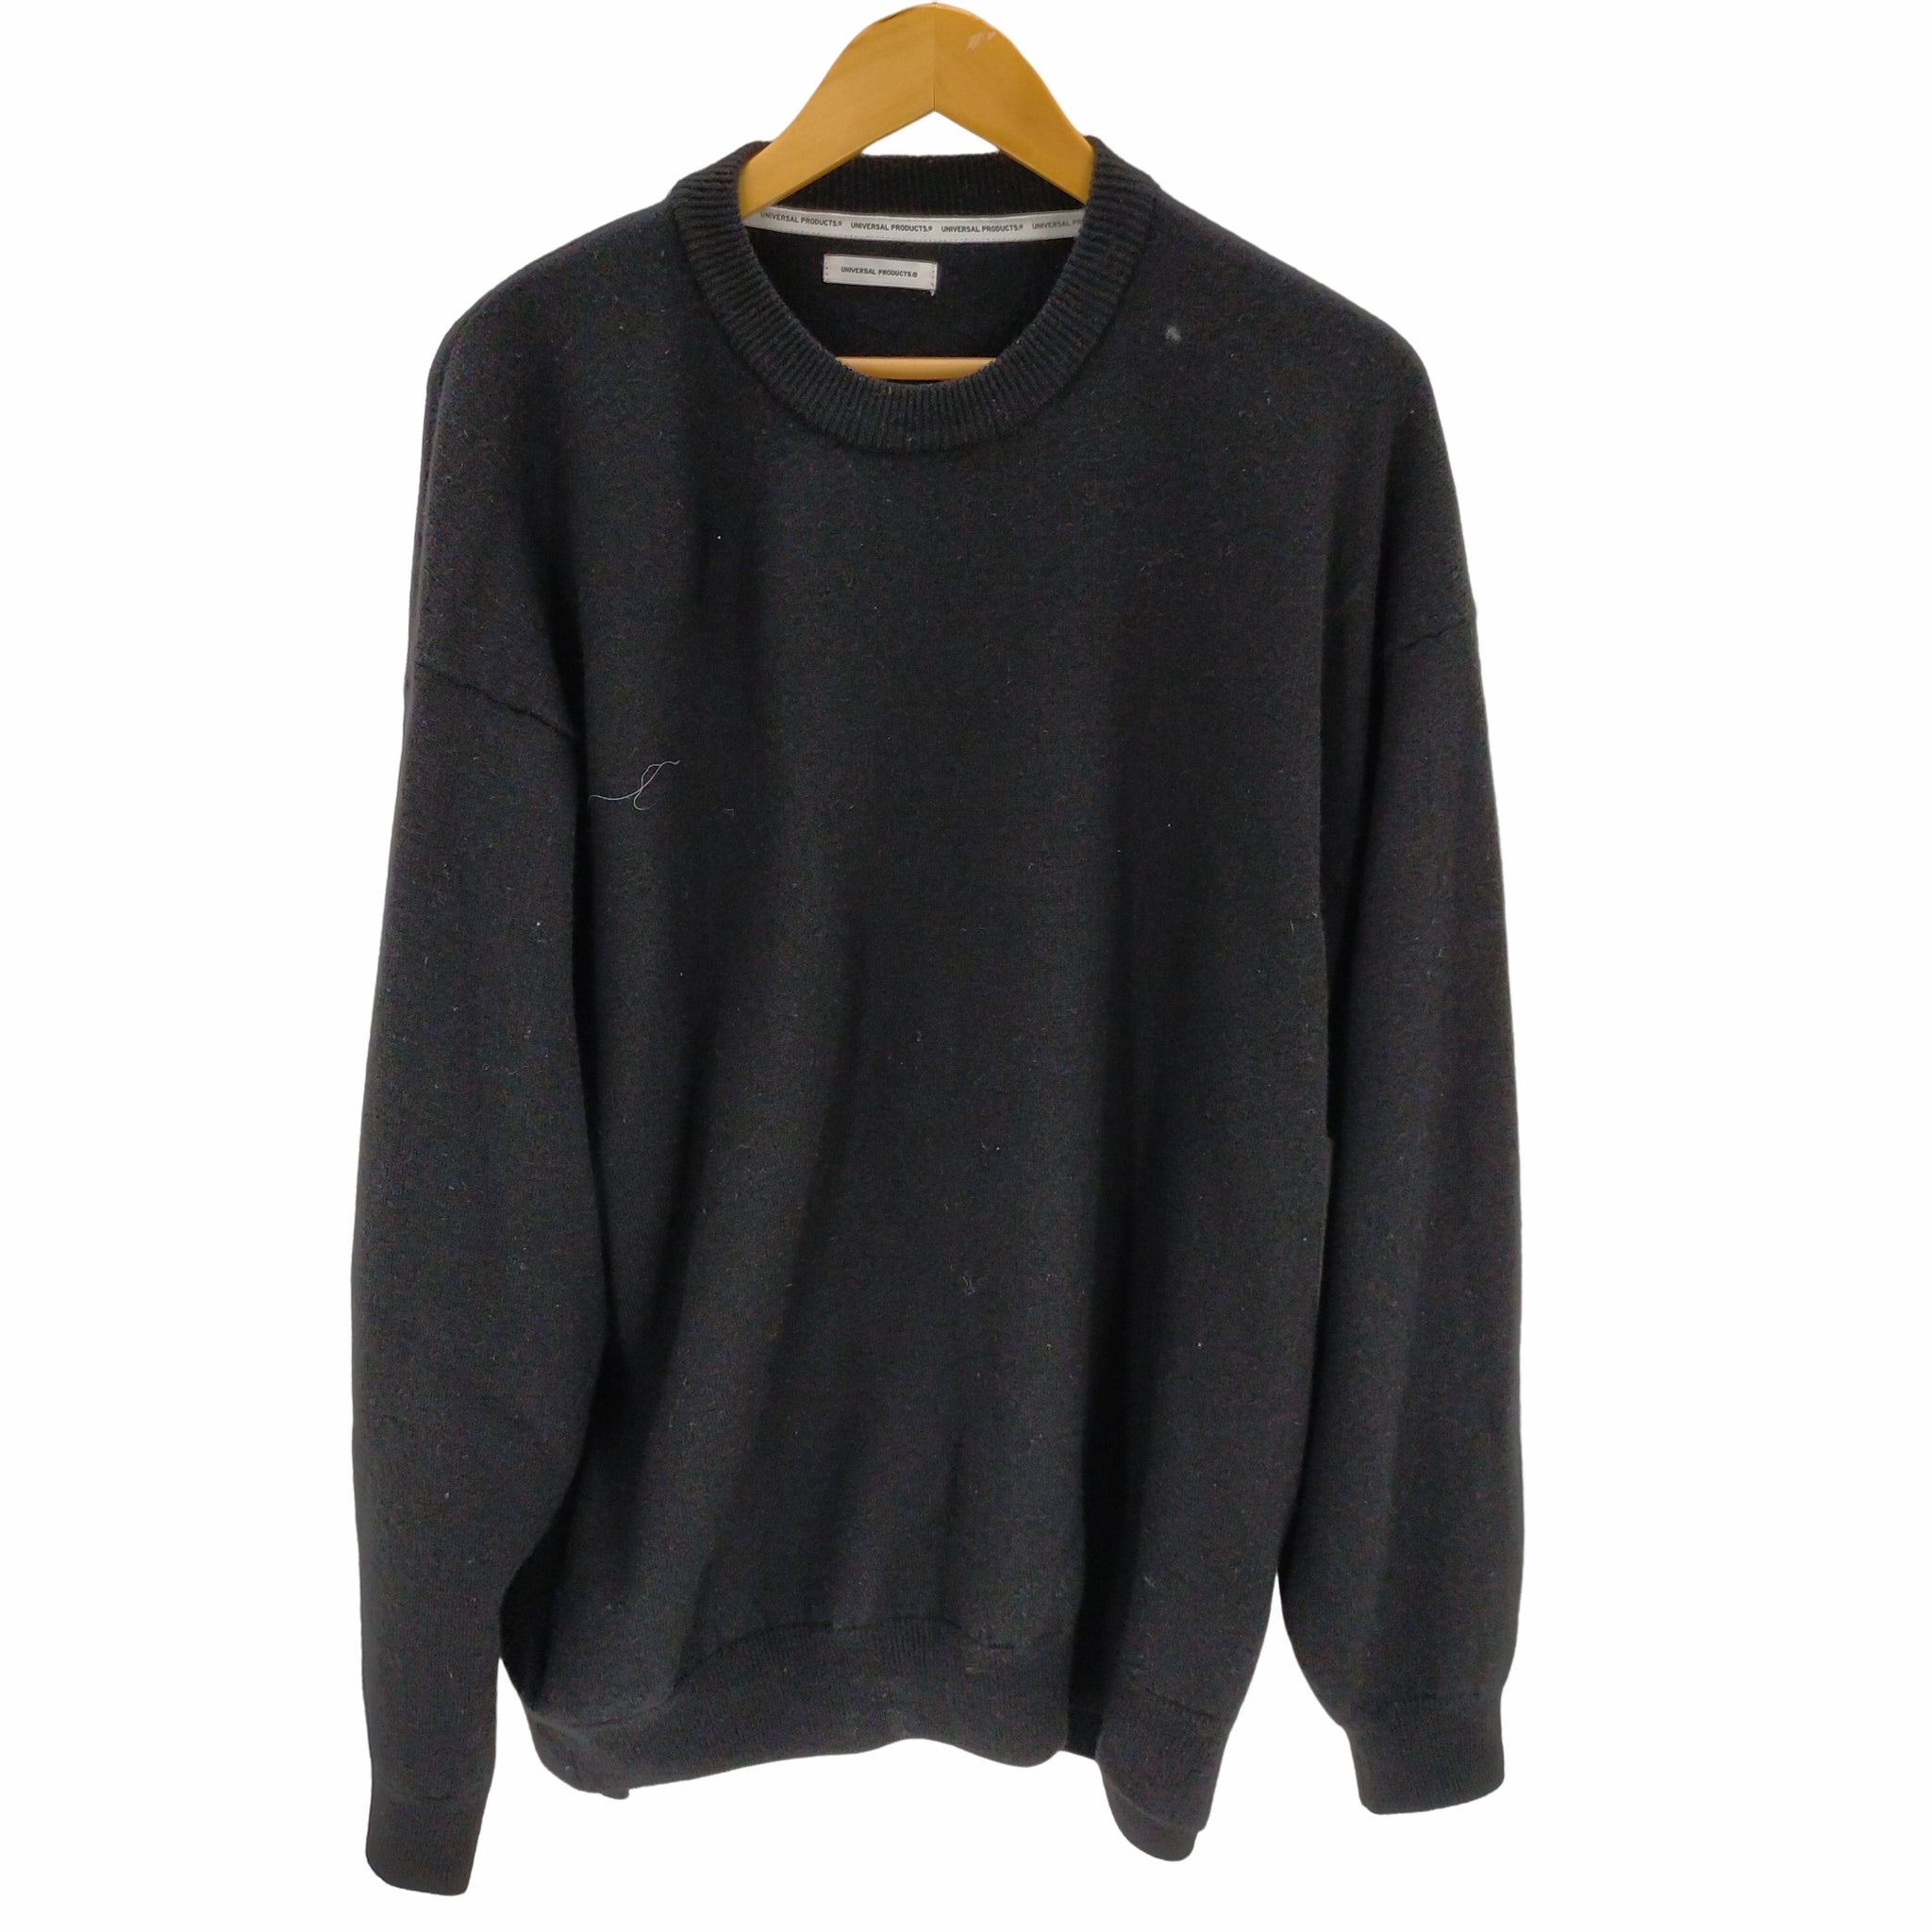 UNIVERSAL PRODUCTS(ユニバーサルプロダクツ)22AW FELTED MERINO WOOL CREW NECK KNIT